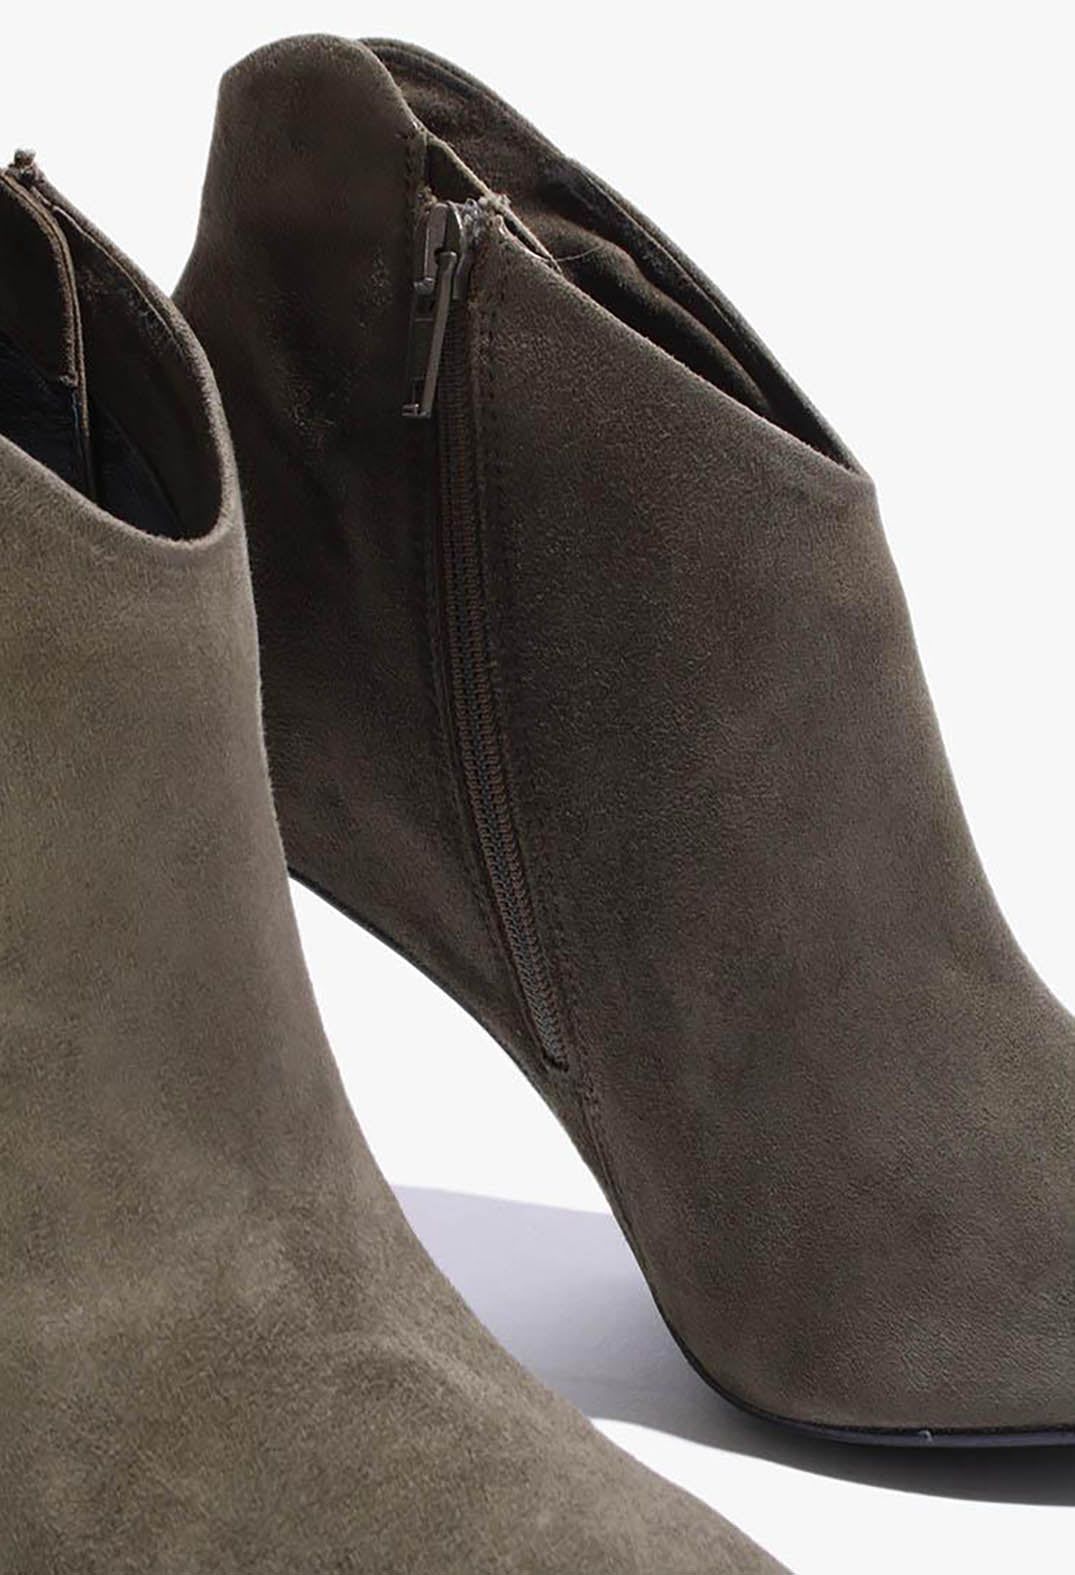 Heeled Suede Ankle Boot with Zip in Army